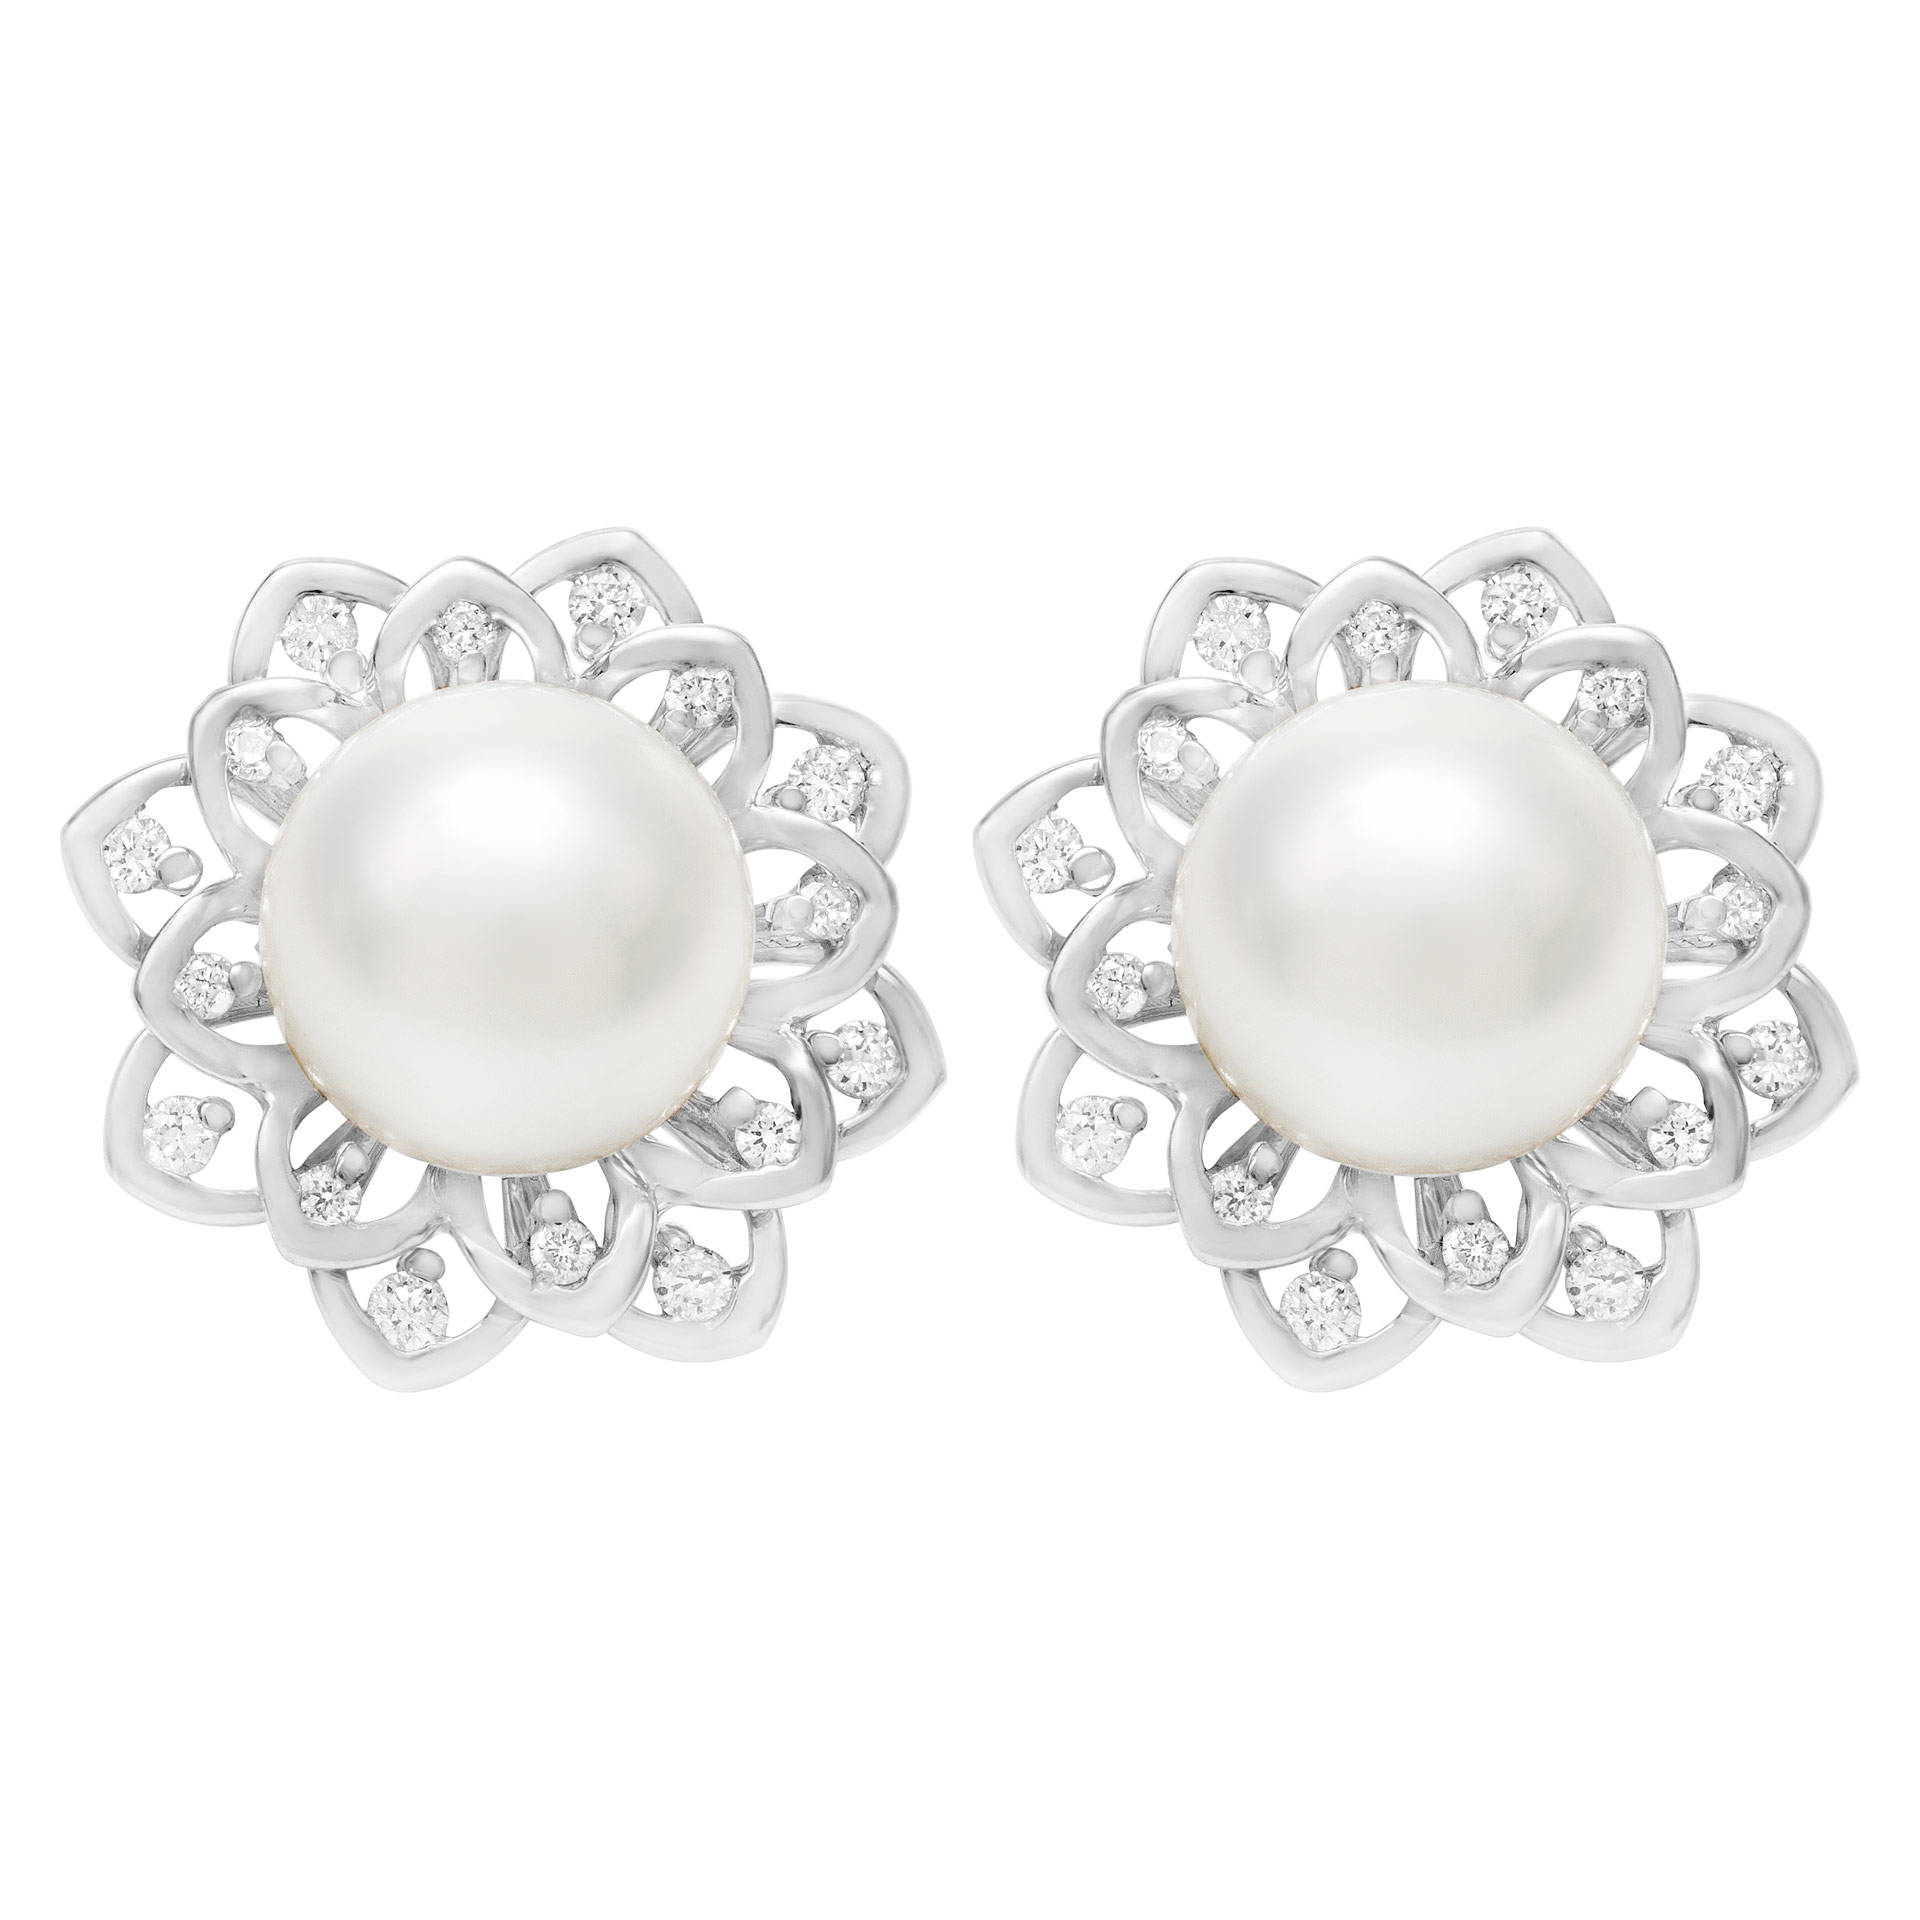 Cute and lovely 9mm South sea diamond pearl stud earrings in 18k white gold